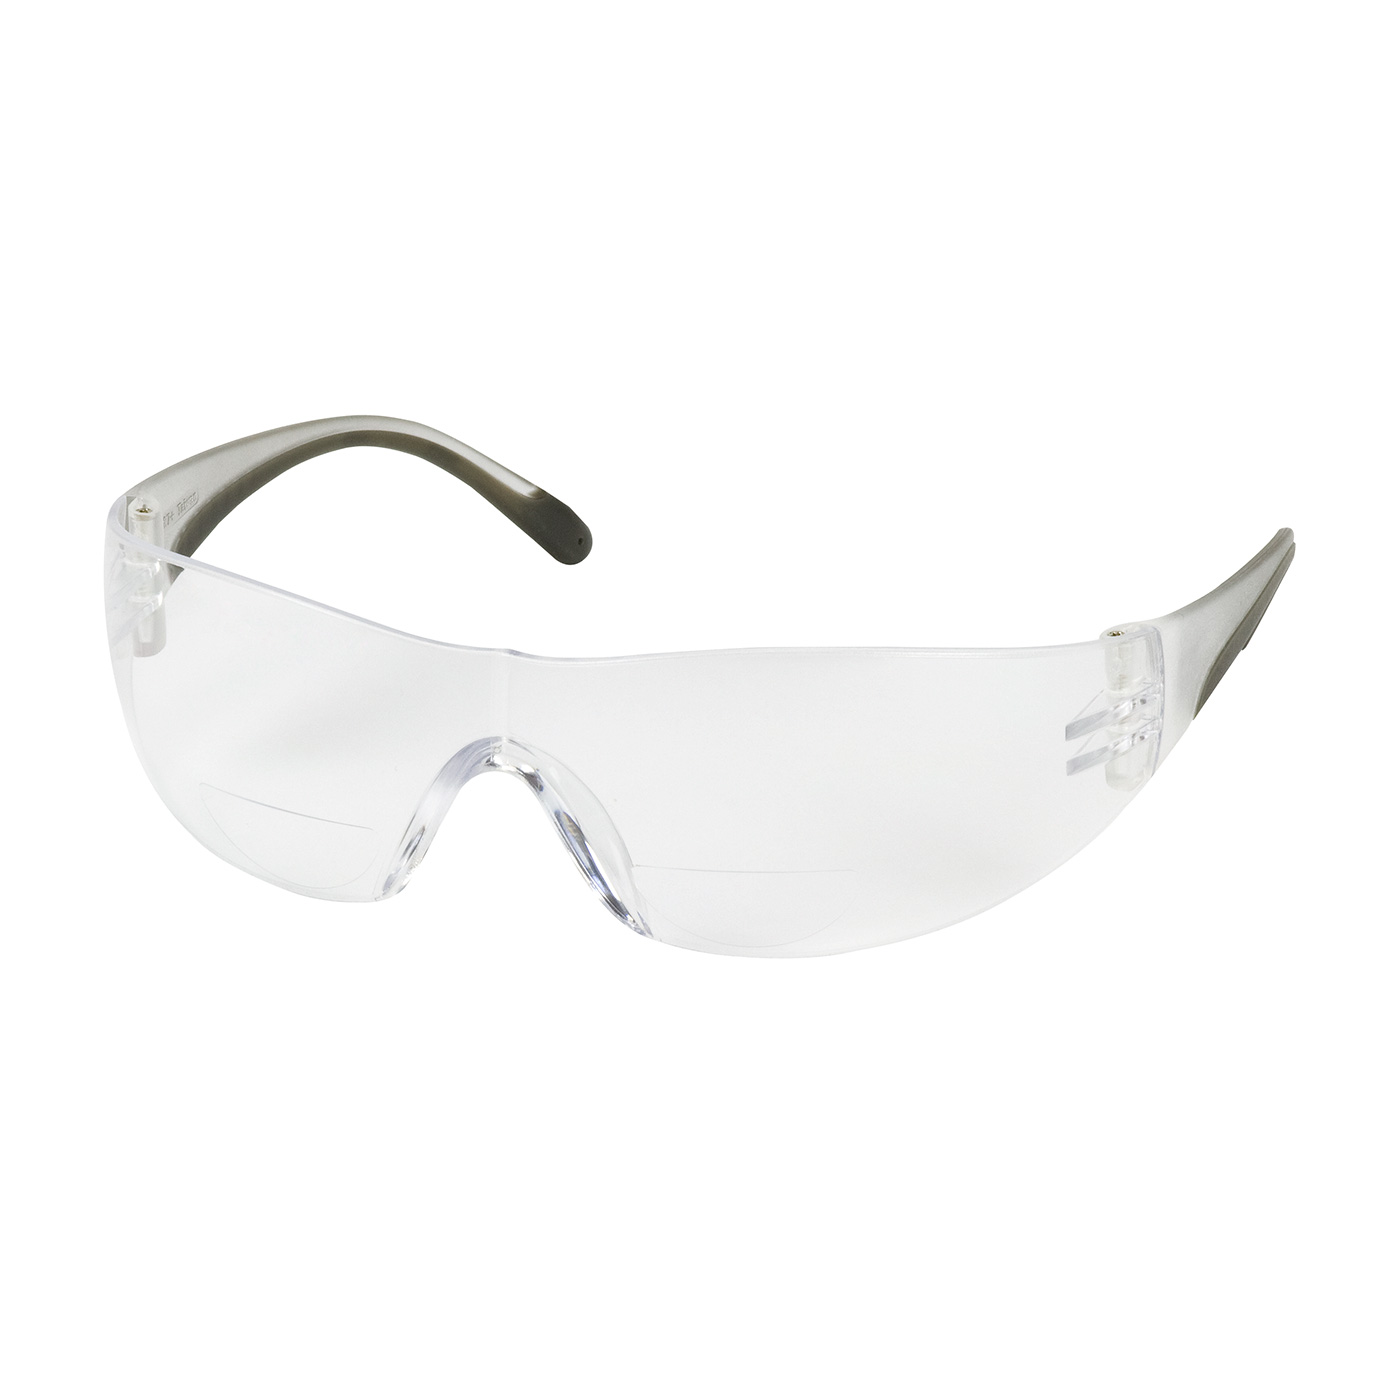 PIP 250-27-0025 Zenon Z12R Rimless Safety Readers with Clear Temple, Clear Lens and Anti-Scratch Coating - +2.50 Diopter PID-250270025